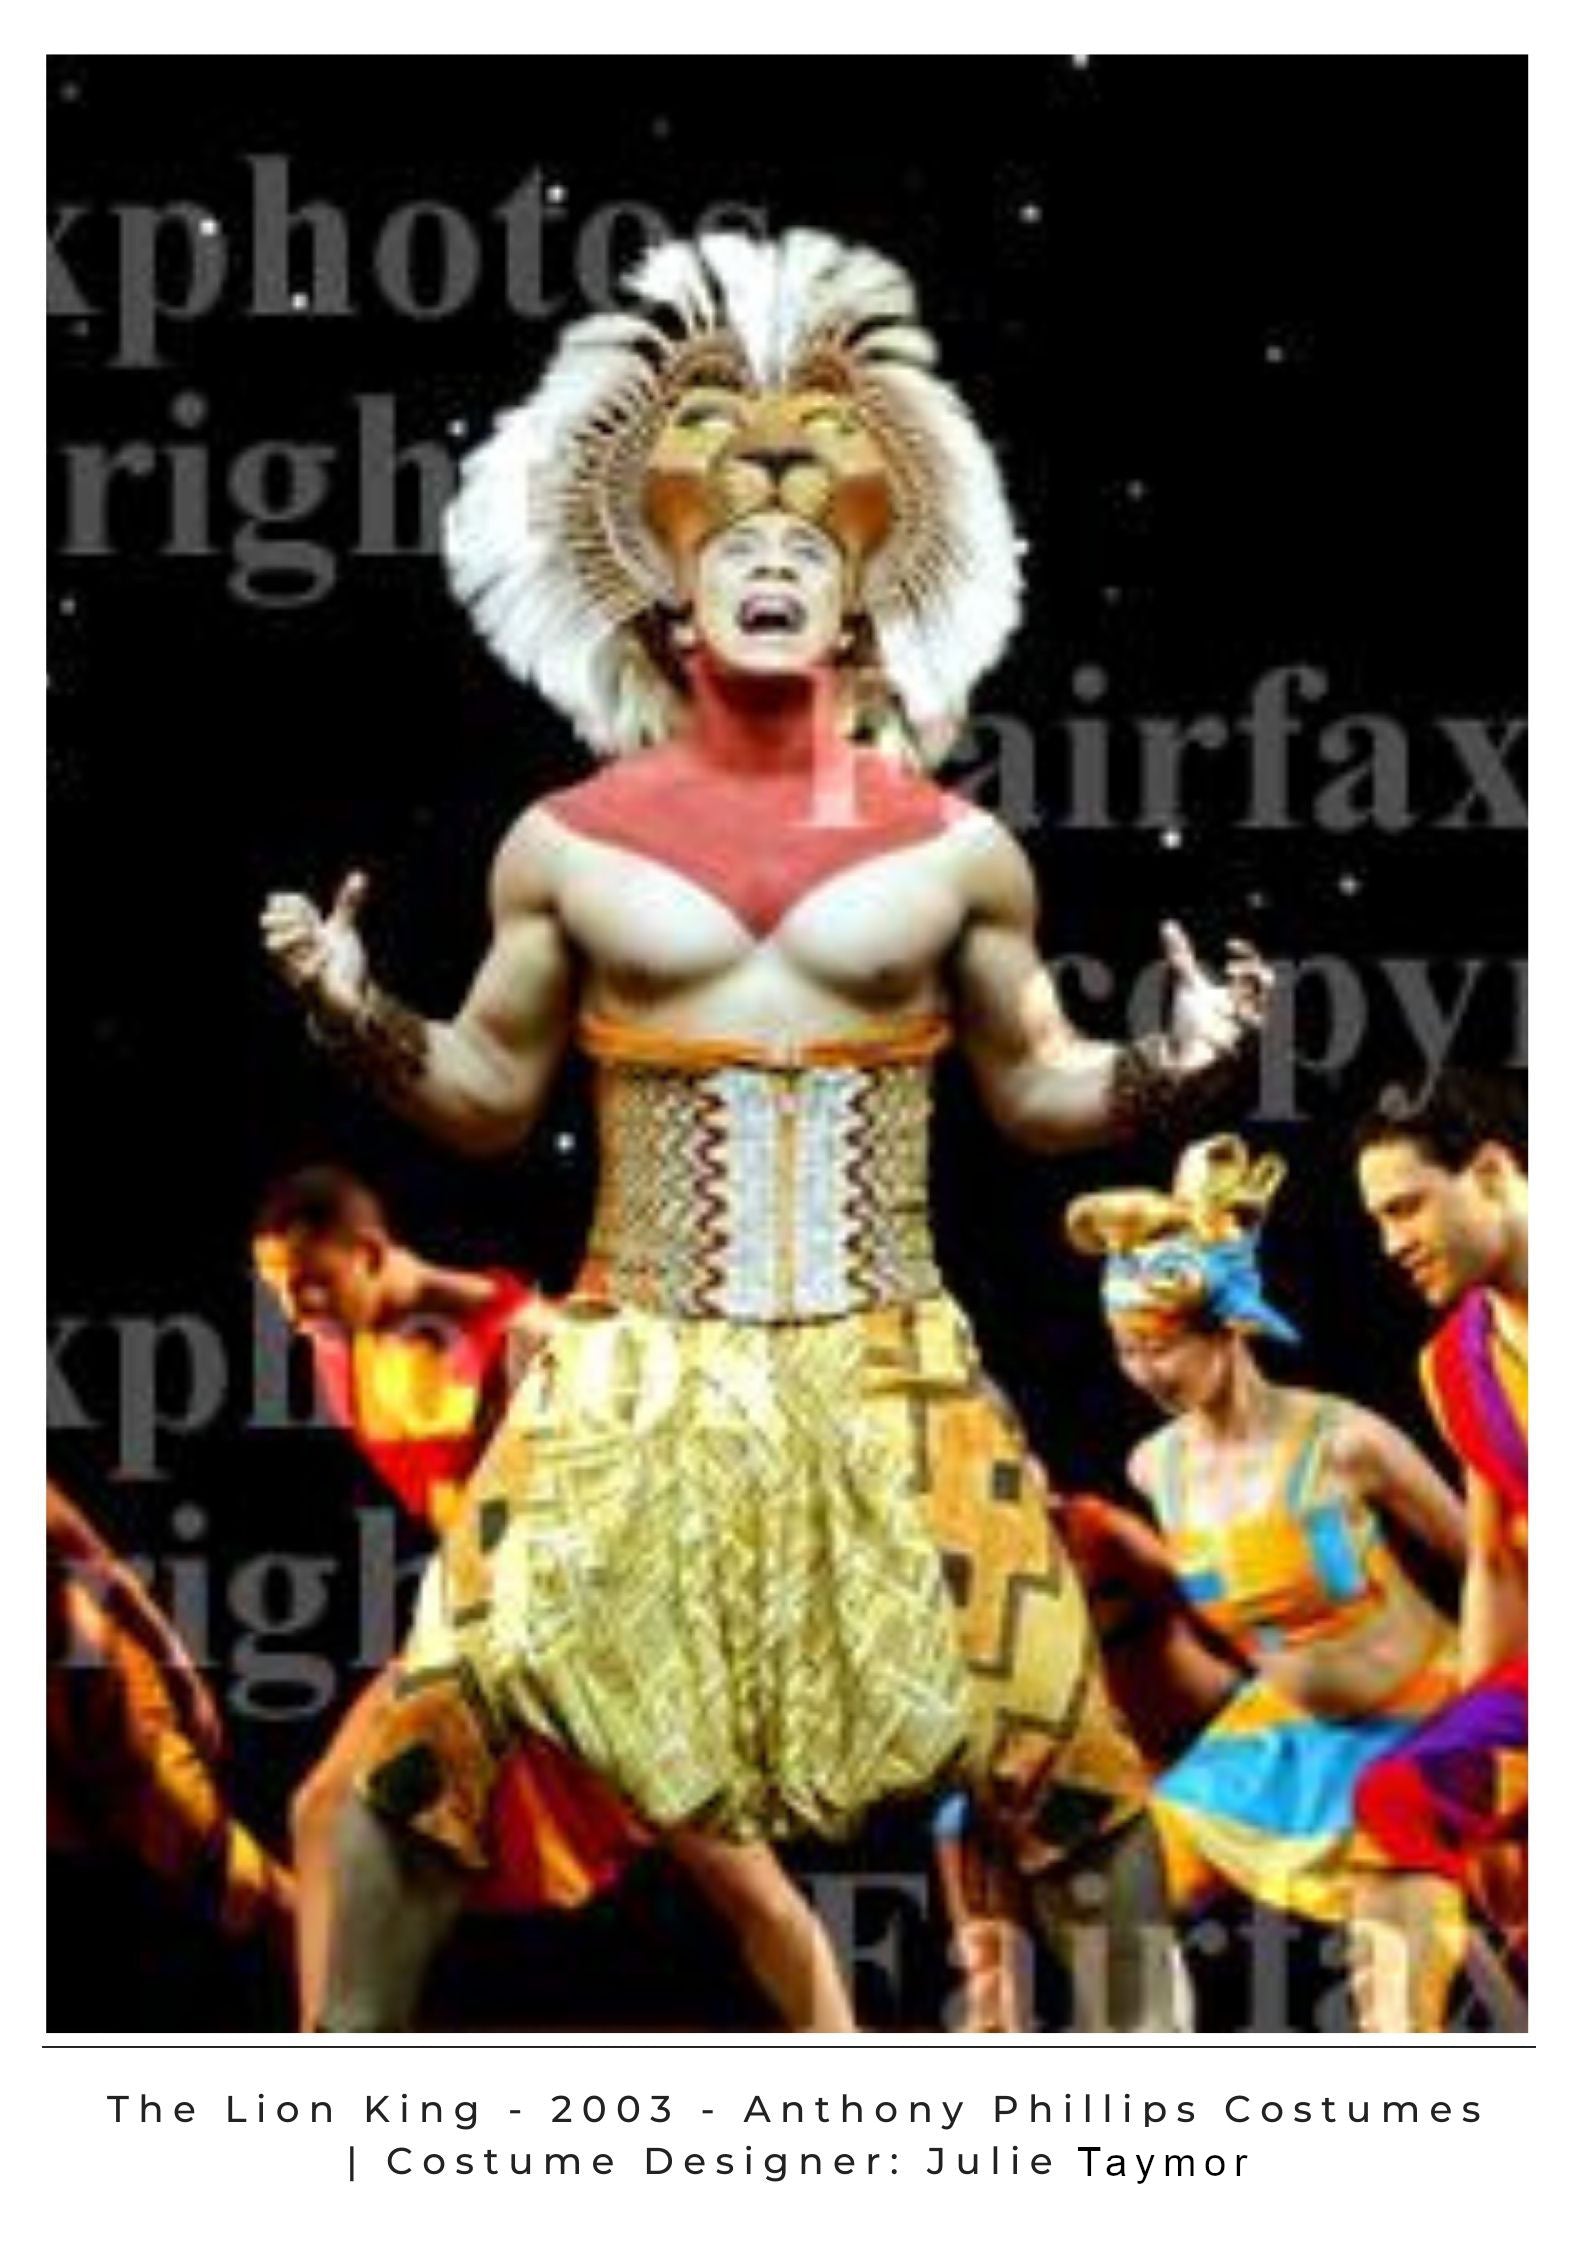 The Lion King Broadway Musical Entertainment Industry Theatre Movie Work Costume Construction Work Seamstress Draper